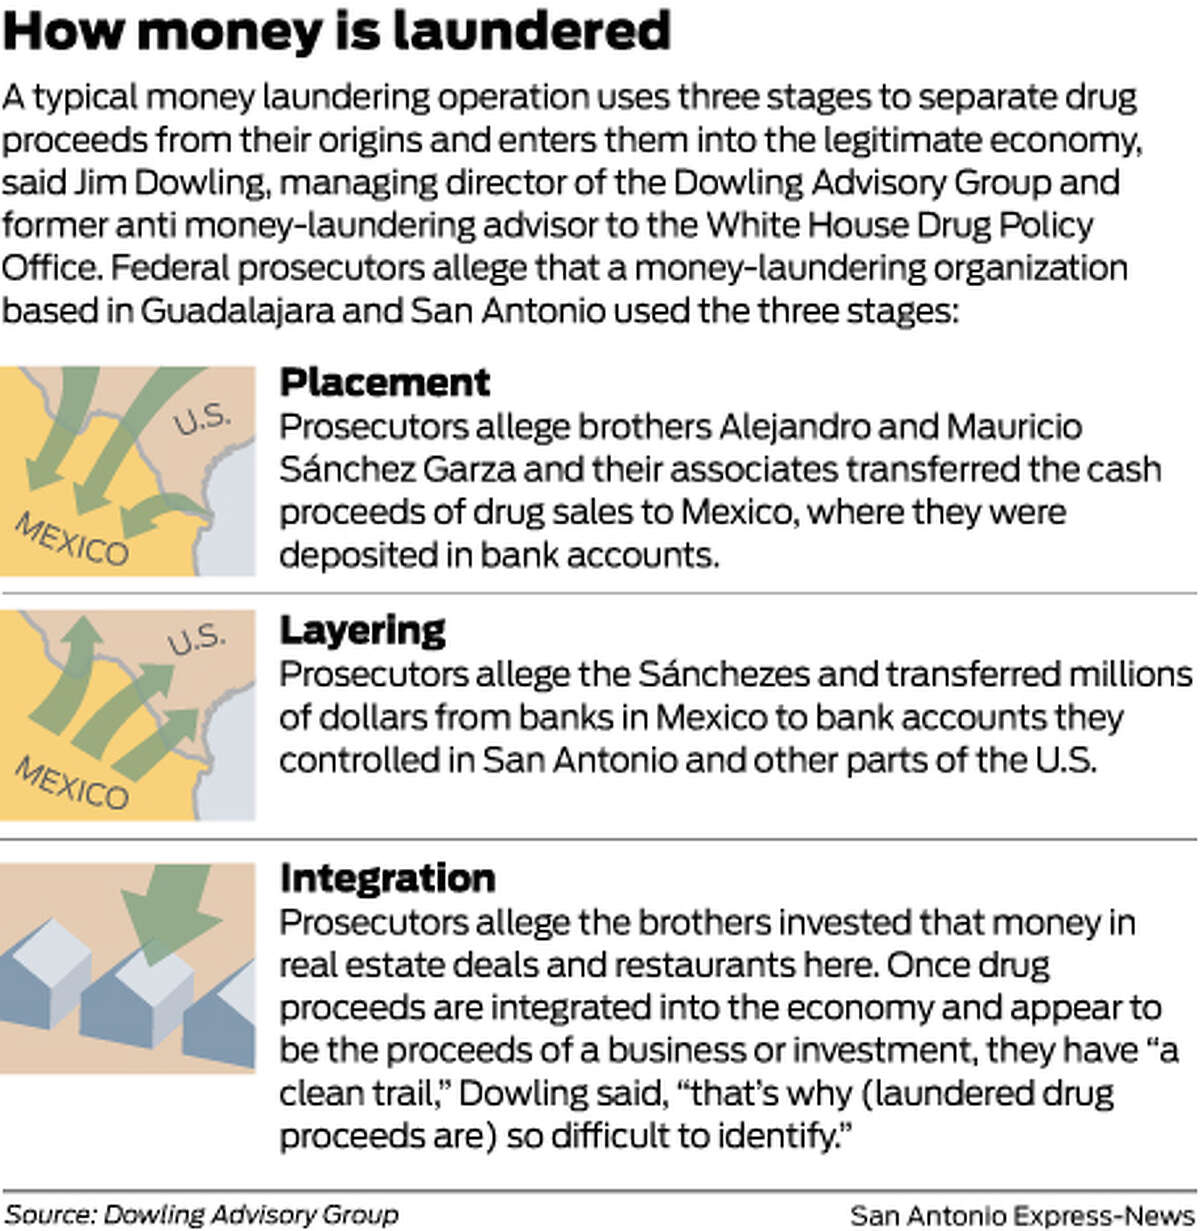 A typical money laundering operation uses three stages to separate drug proceeds from their origins and enters them into the legitimate economy, said Jim Dowling, managing director of the Dowling Advisory Group and former anti money-laundering advisor to the White House Drug Policy Office. Federal prosecutors allege that a money-laundering organization based in Guadalajara and San Antonio used the three stages: